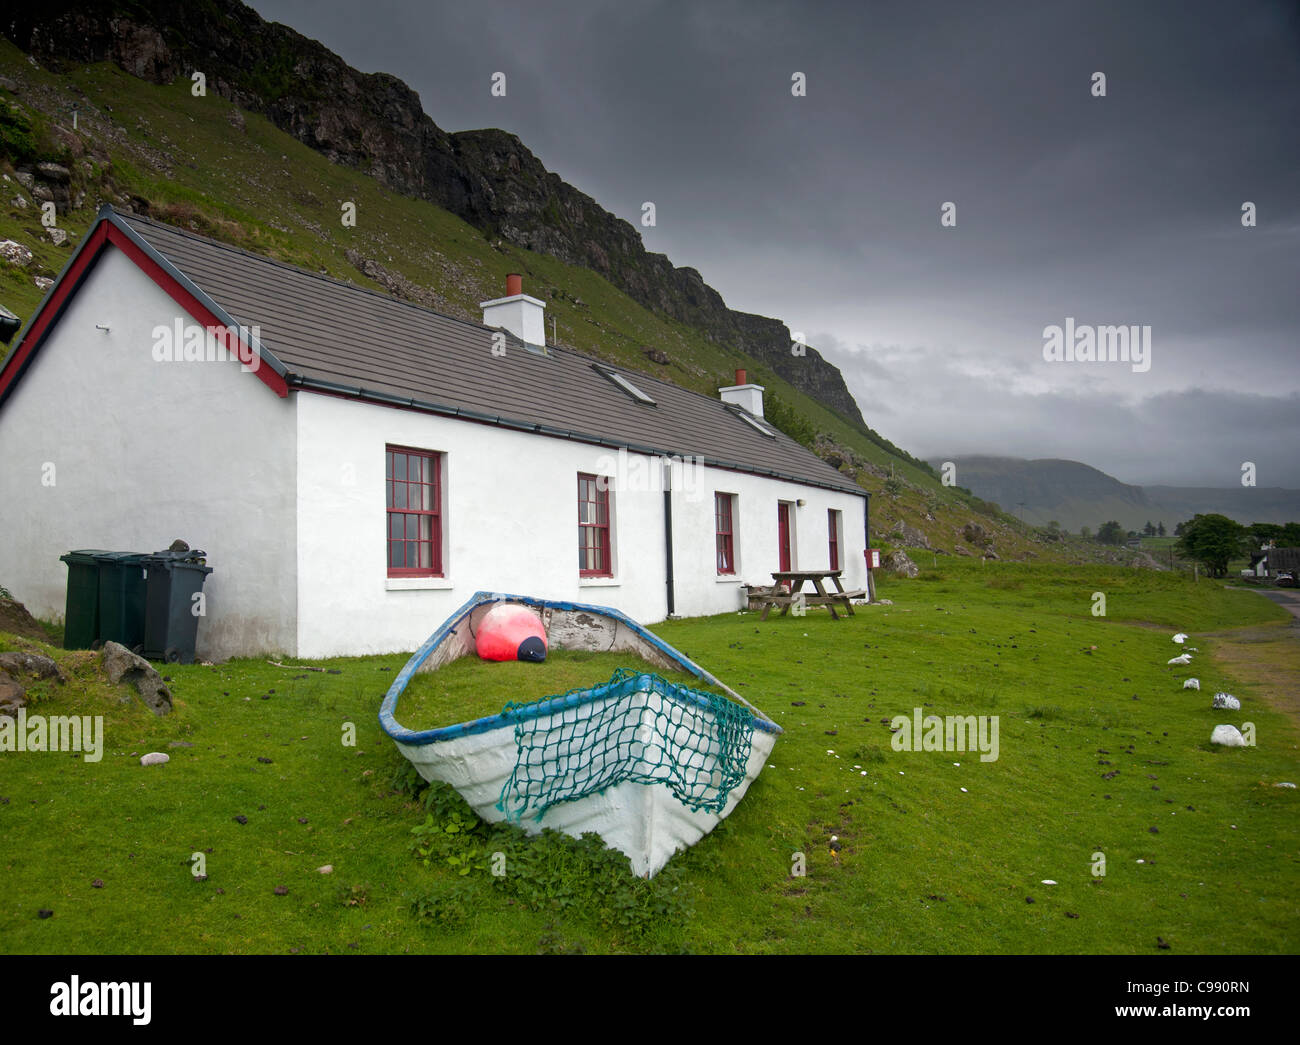 Bacca cottage Gribun Overlooking Loch na Keal, Isle of Mull, Scotland.  SCO 7730 Stock Photo